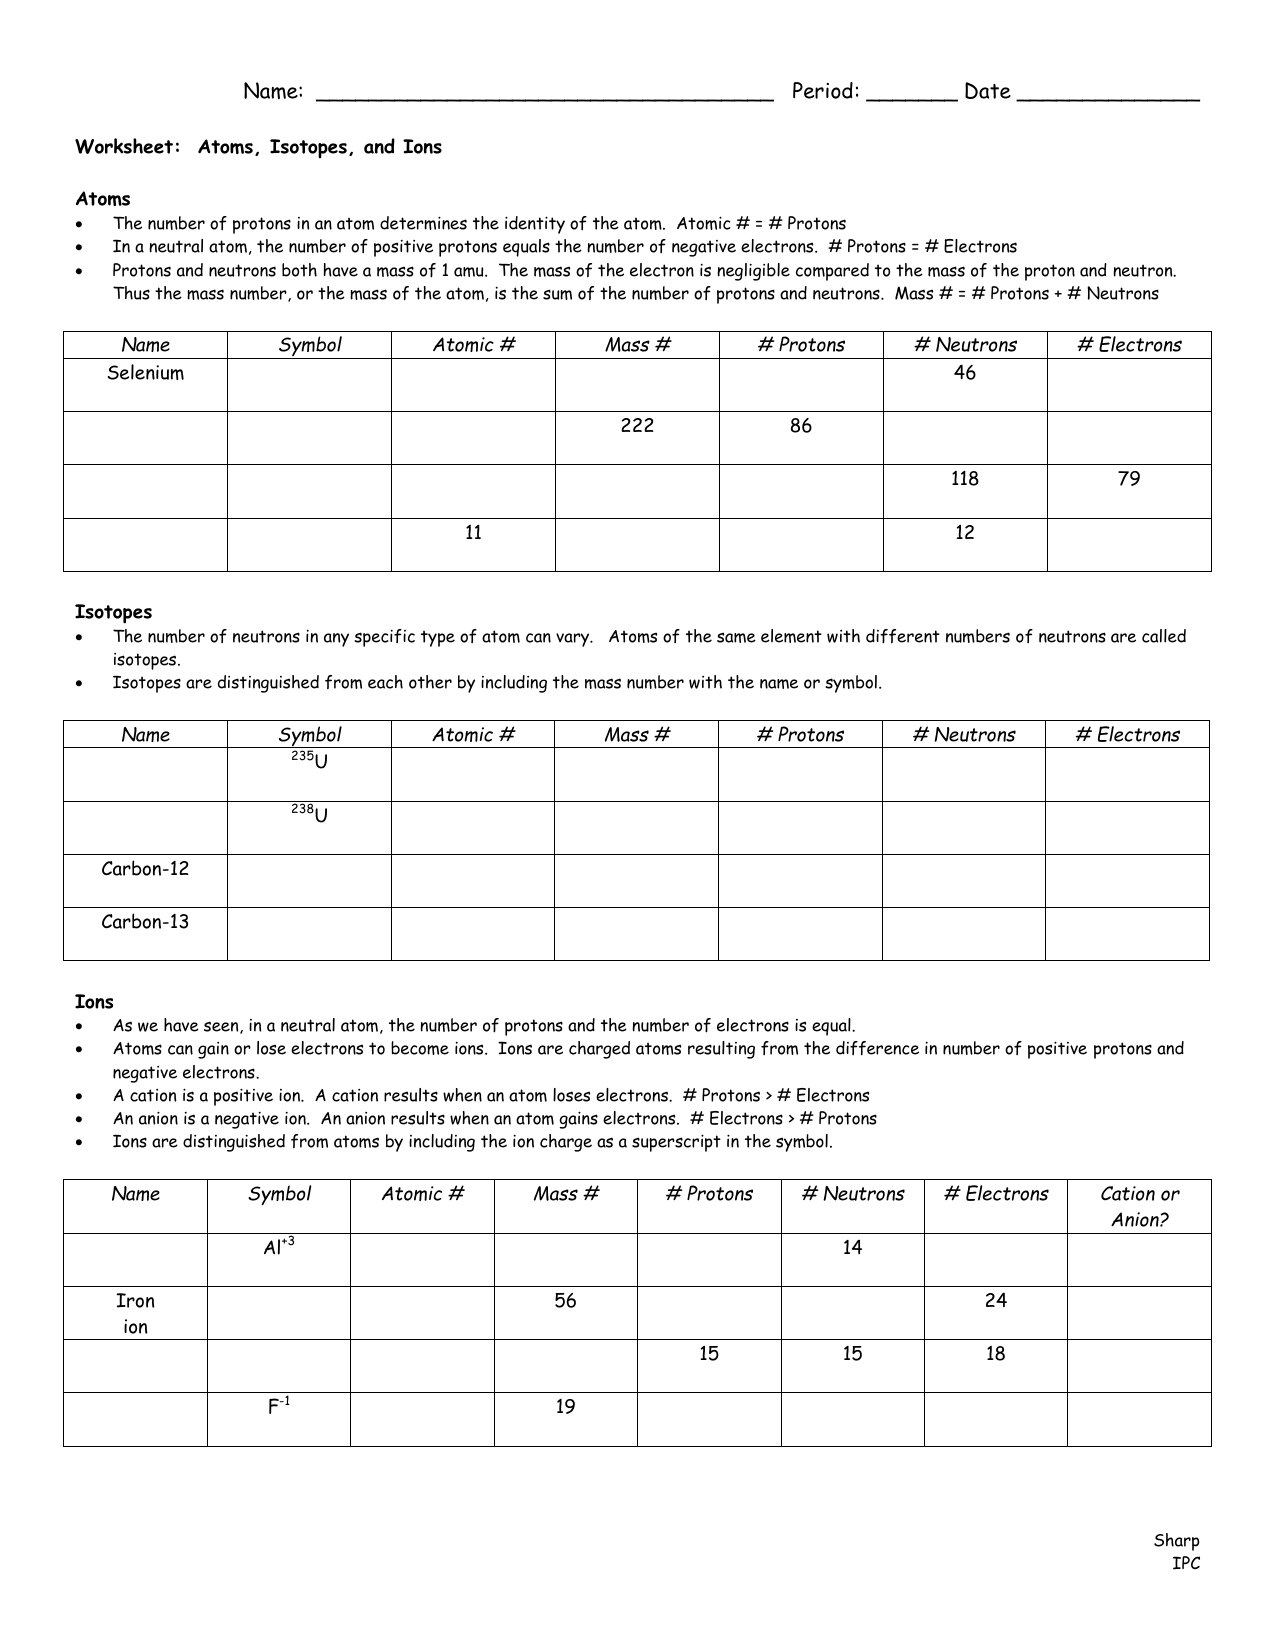 Atoms, Isotopes, & Ions Worksheet For Atoms And Isotopes Worksheet